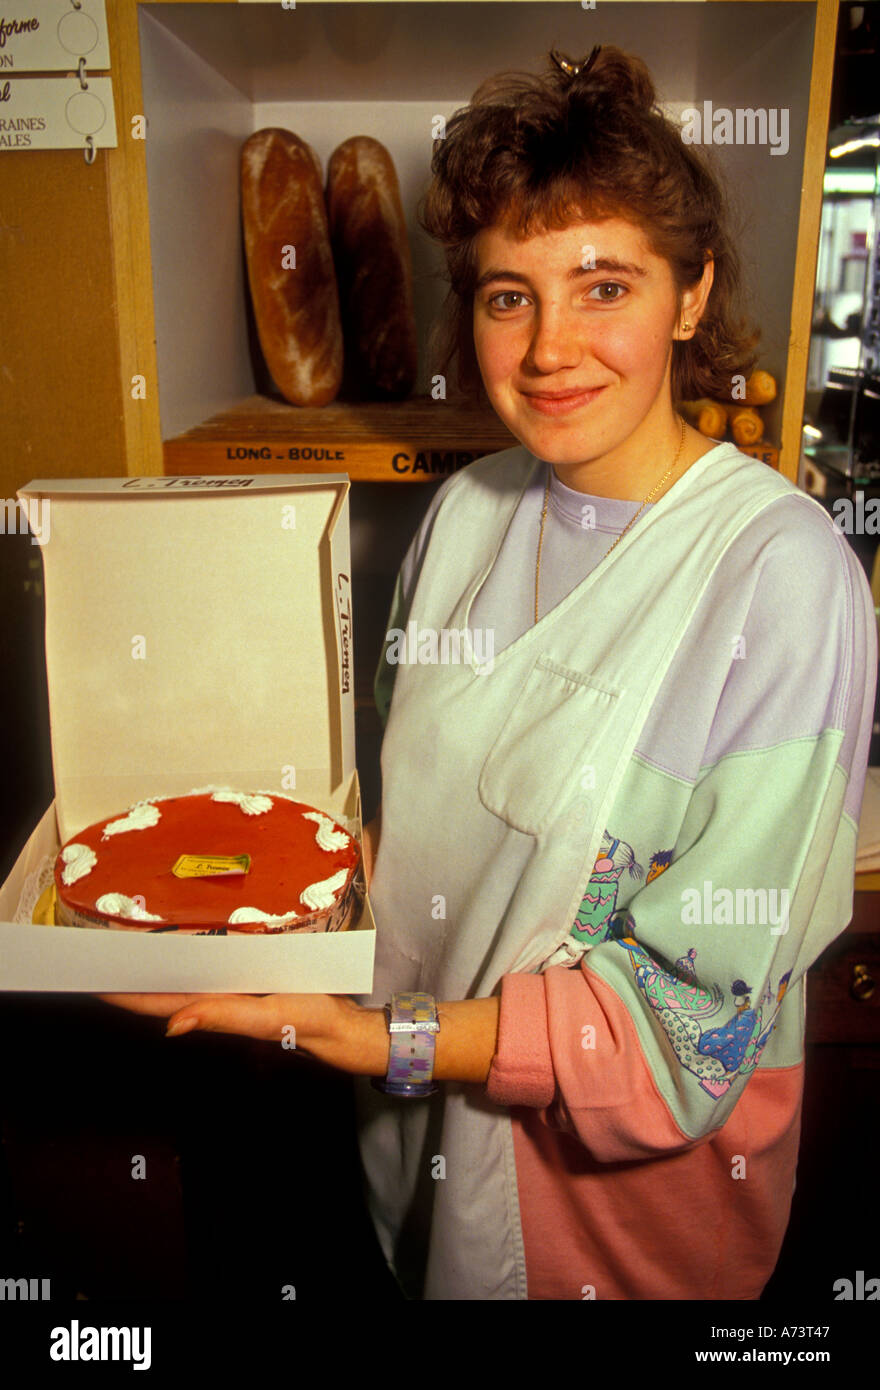 1, one, Frenchwoman, French woman, baker, employee, holding a cake, bakery, boulangerie, Saint-Vincent-de-Tyrosse, Aquitaine, France, Europe Stock Photo